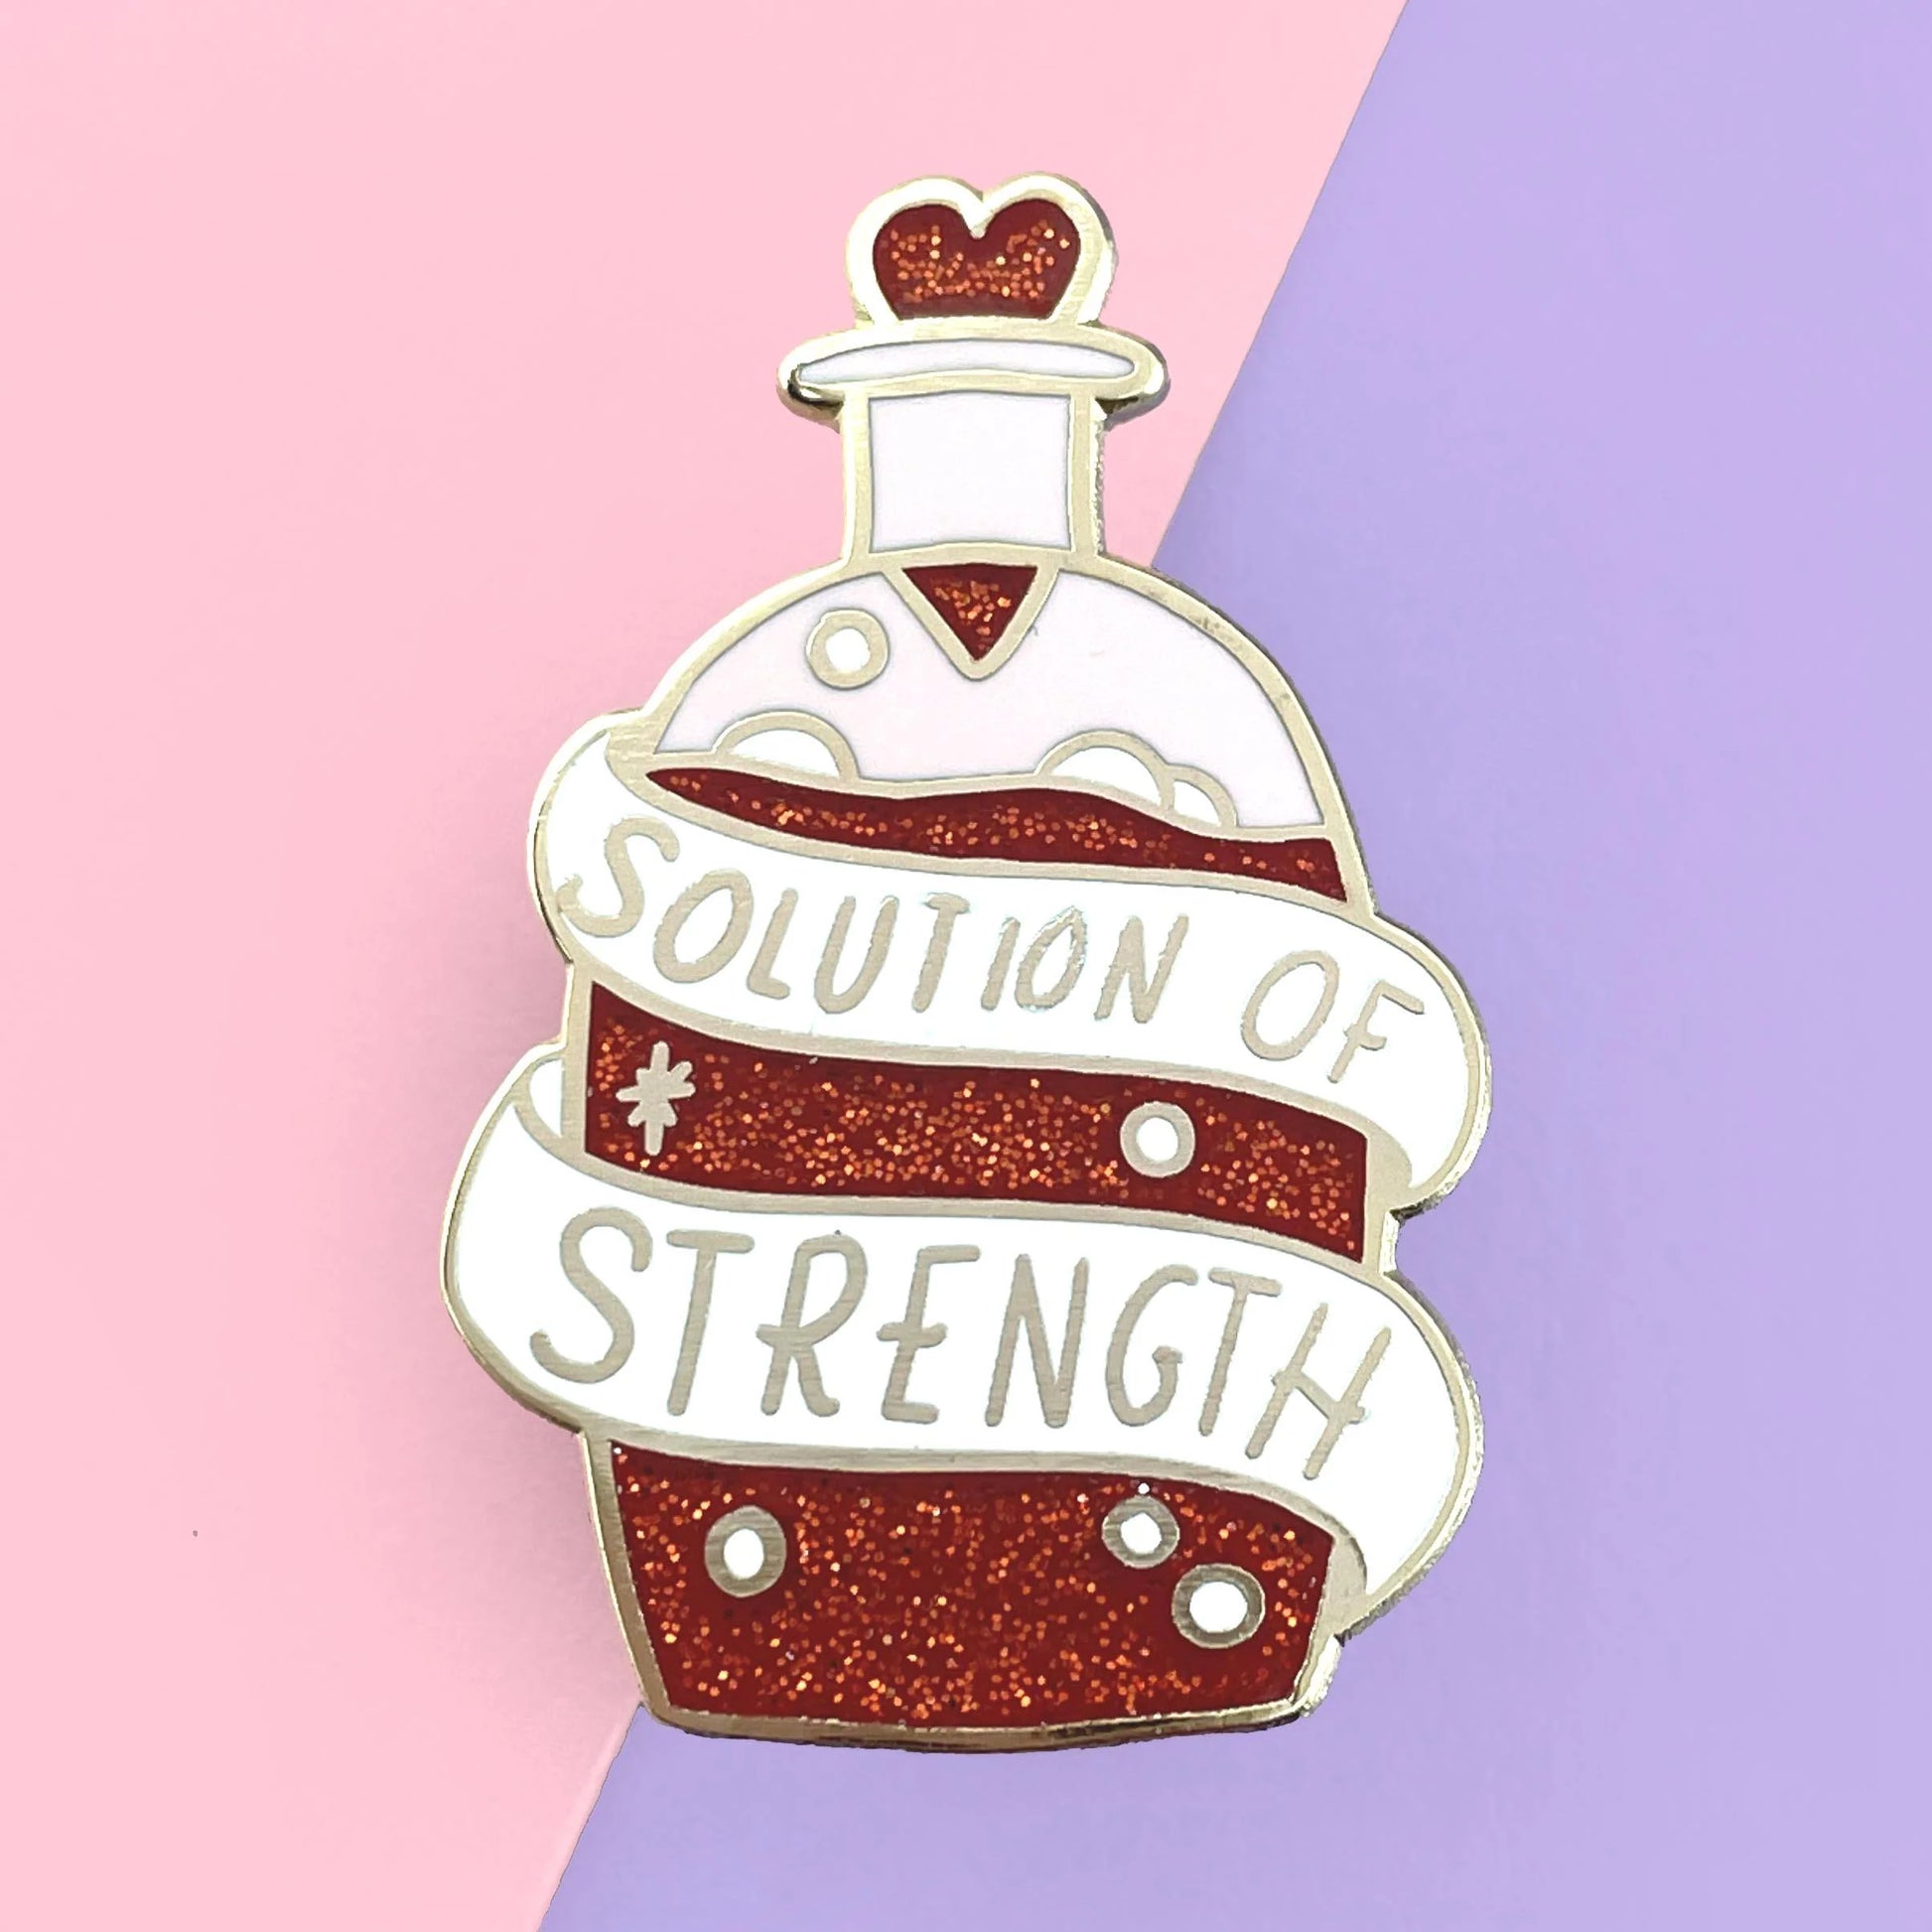 Jubly-Umph_Solution_of_strength_lapel_pin_on_oink_abd_purple_background